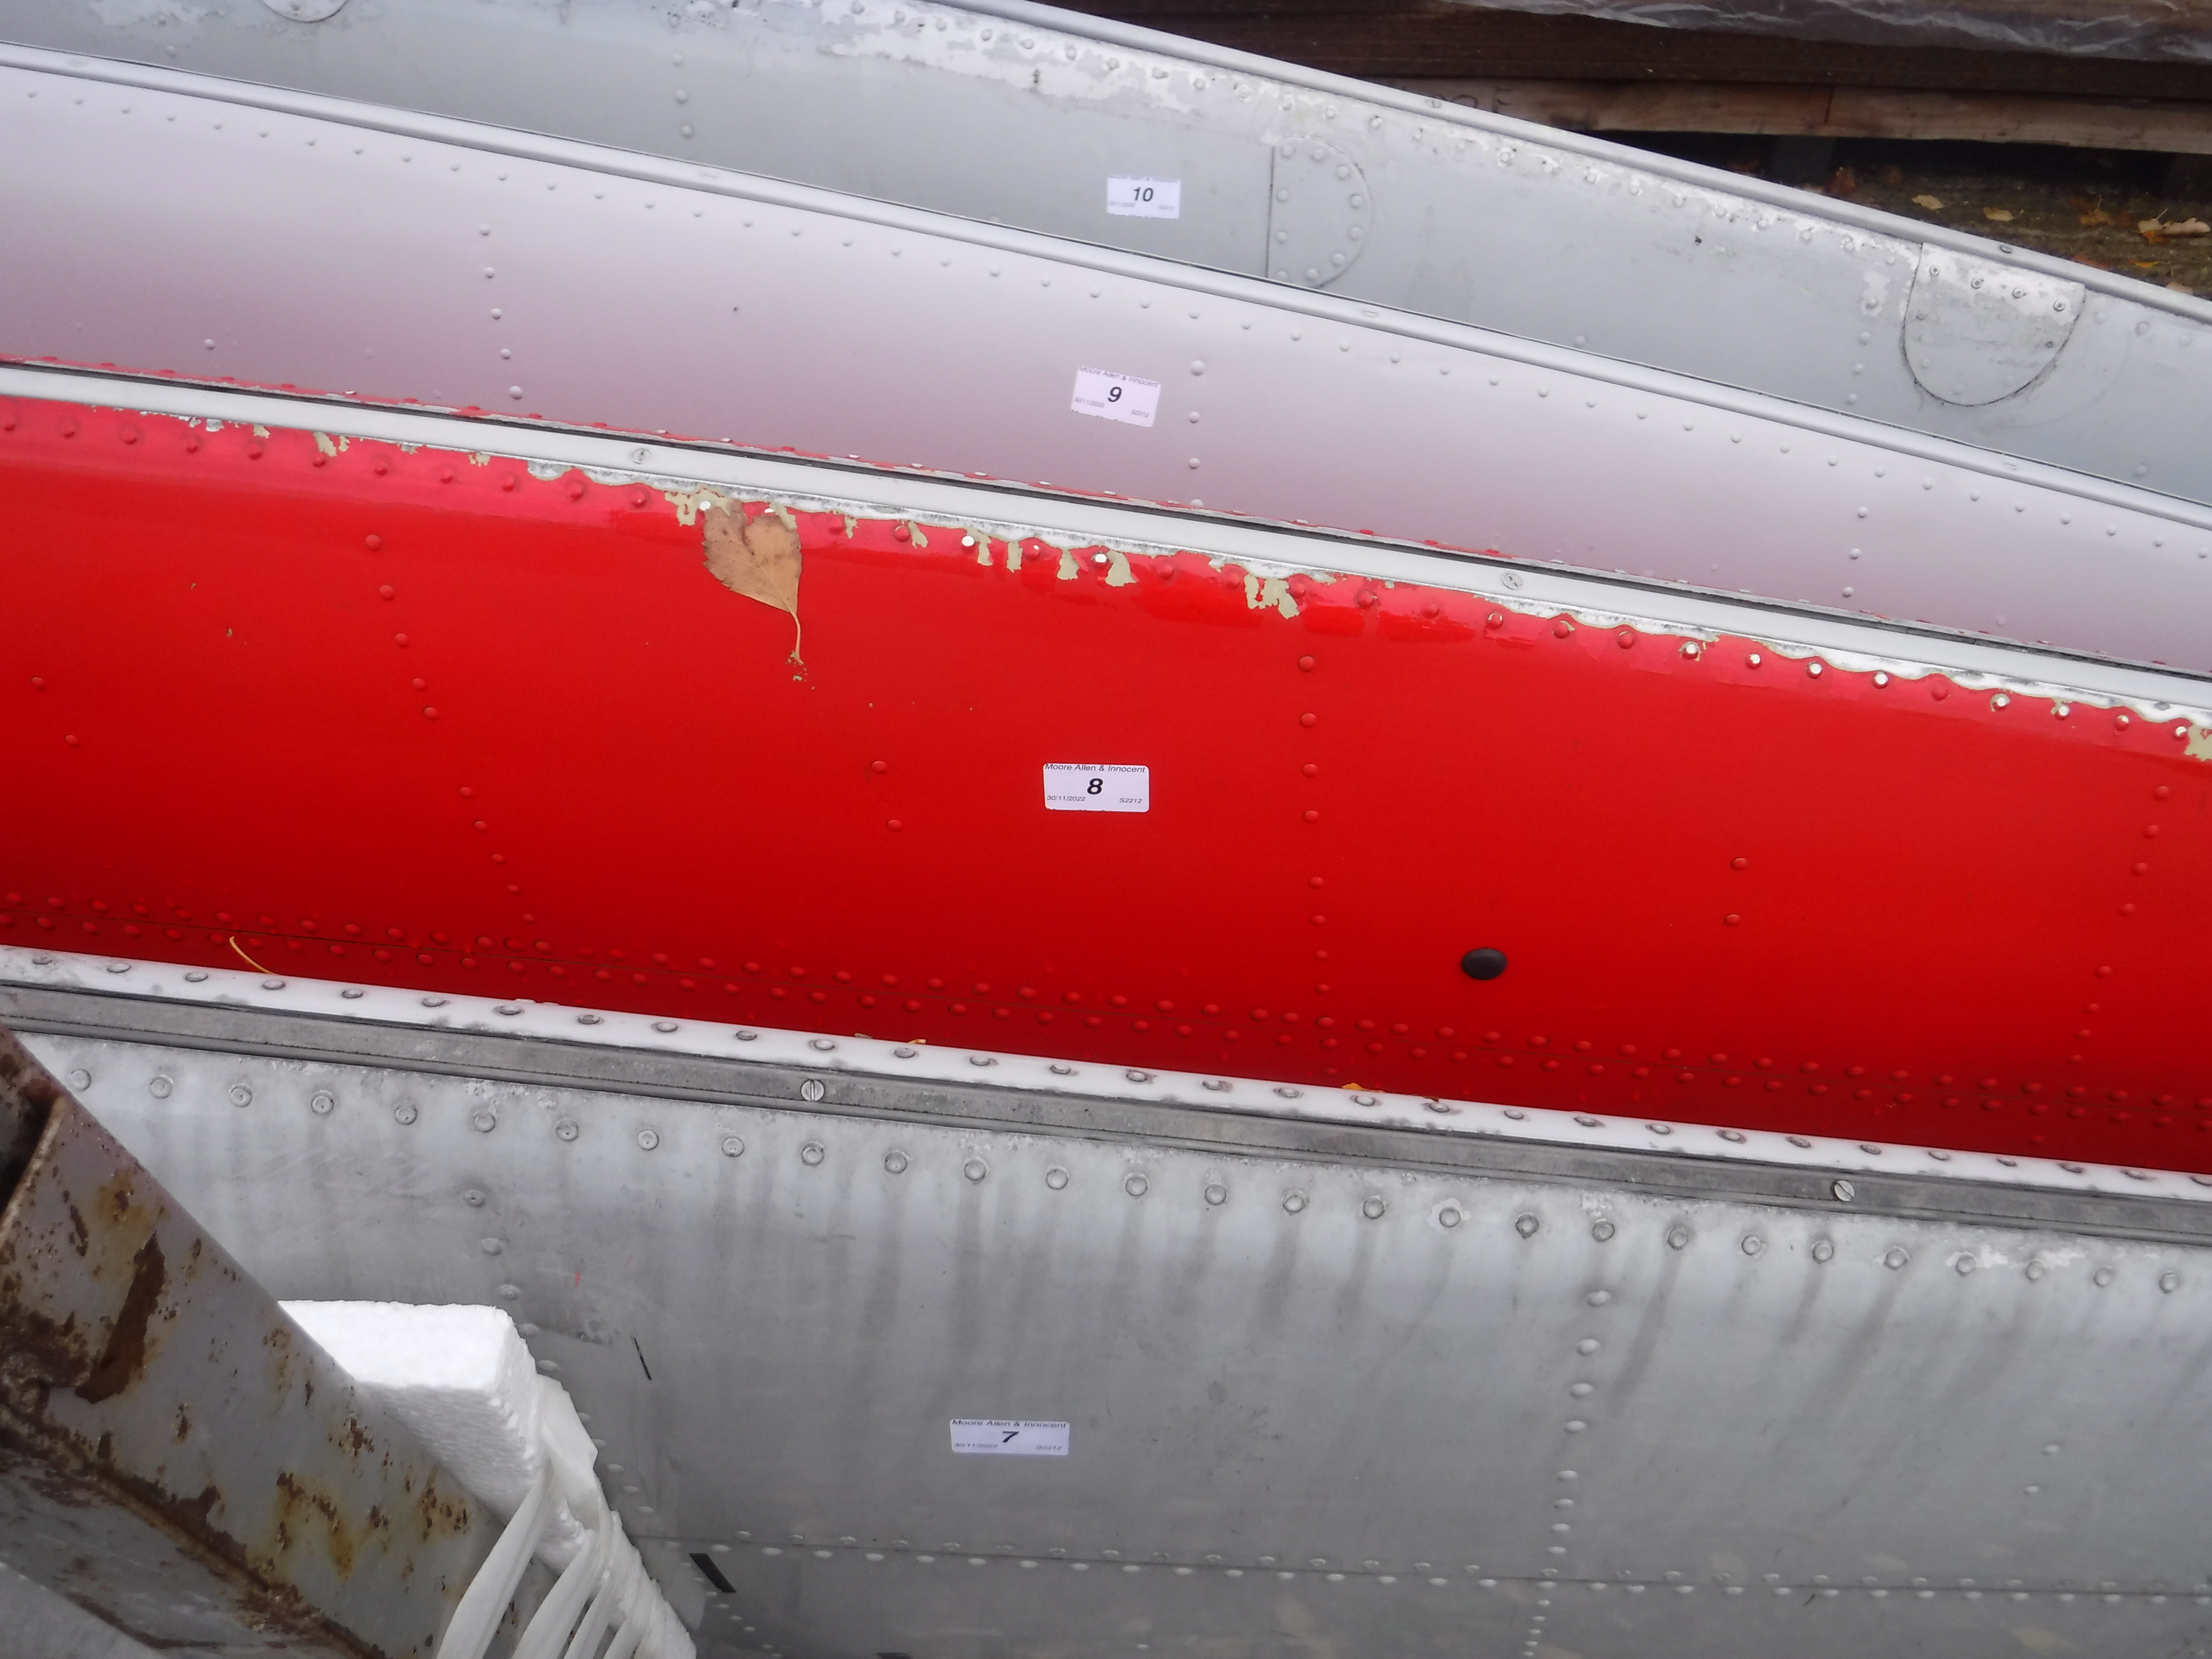 A pale grey painted aircraft tail fin section inscribed "Titanine D.T.D.5.